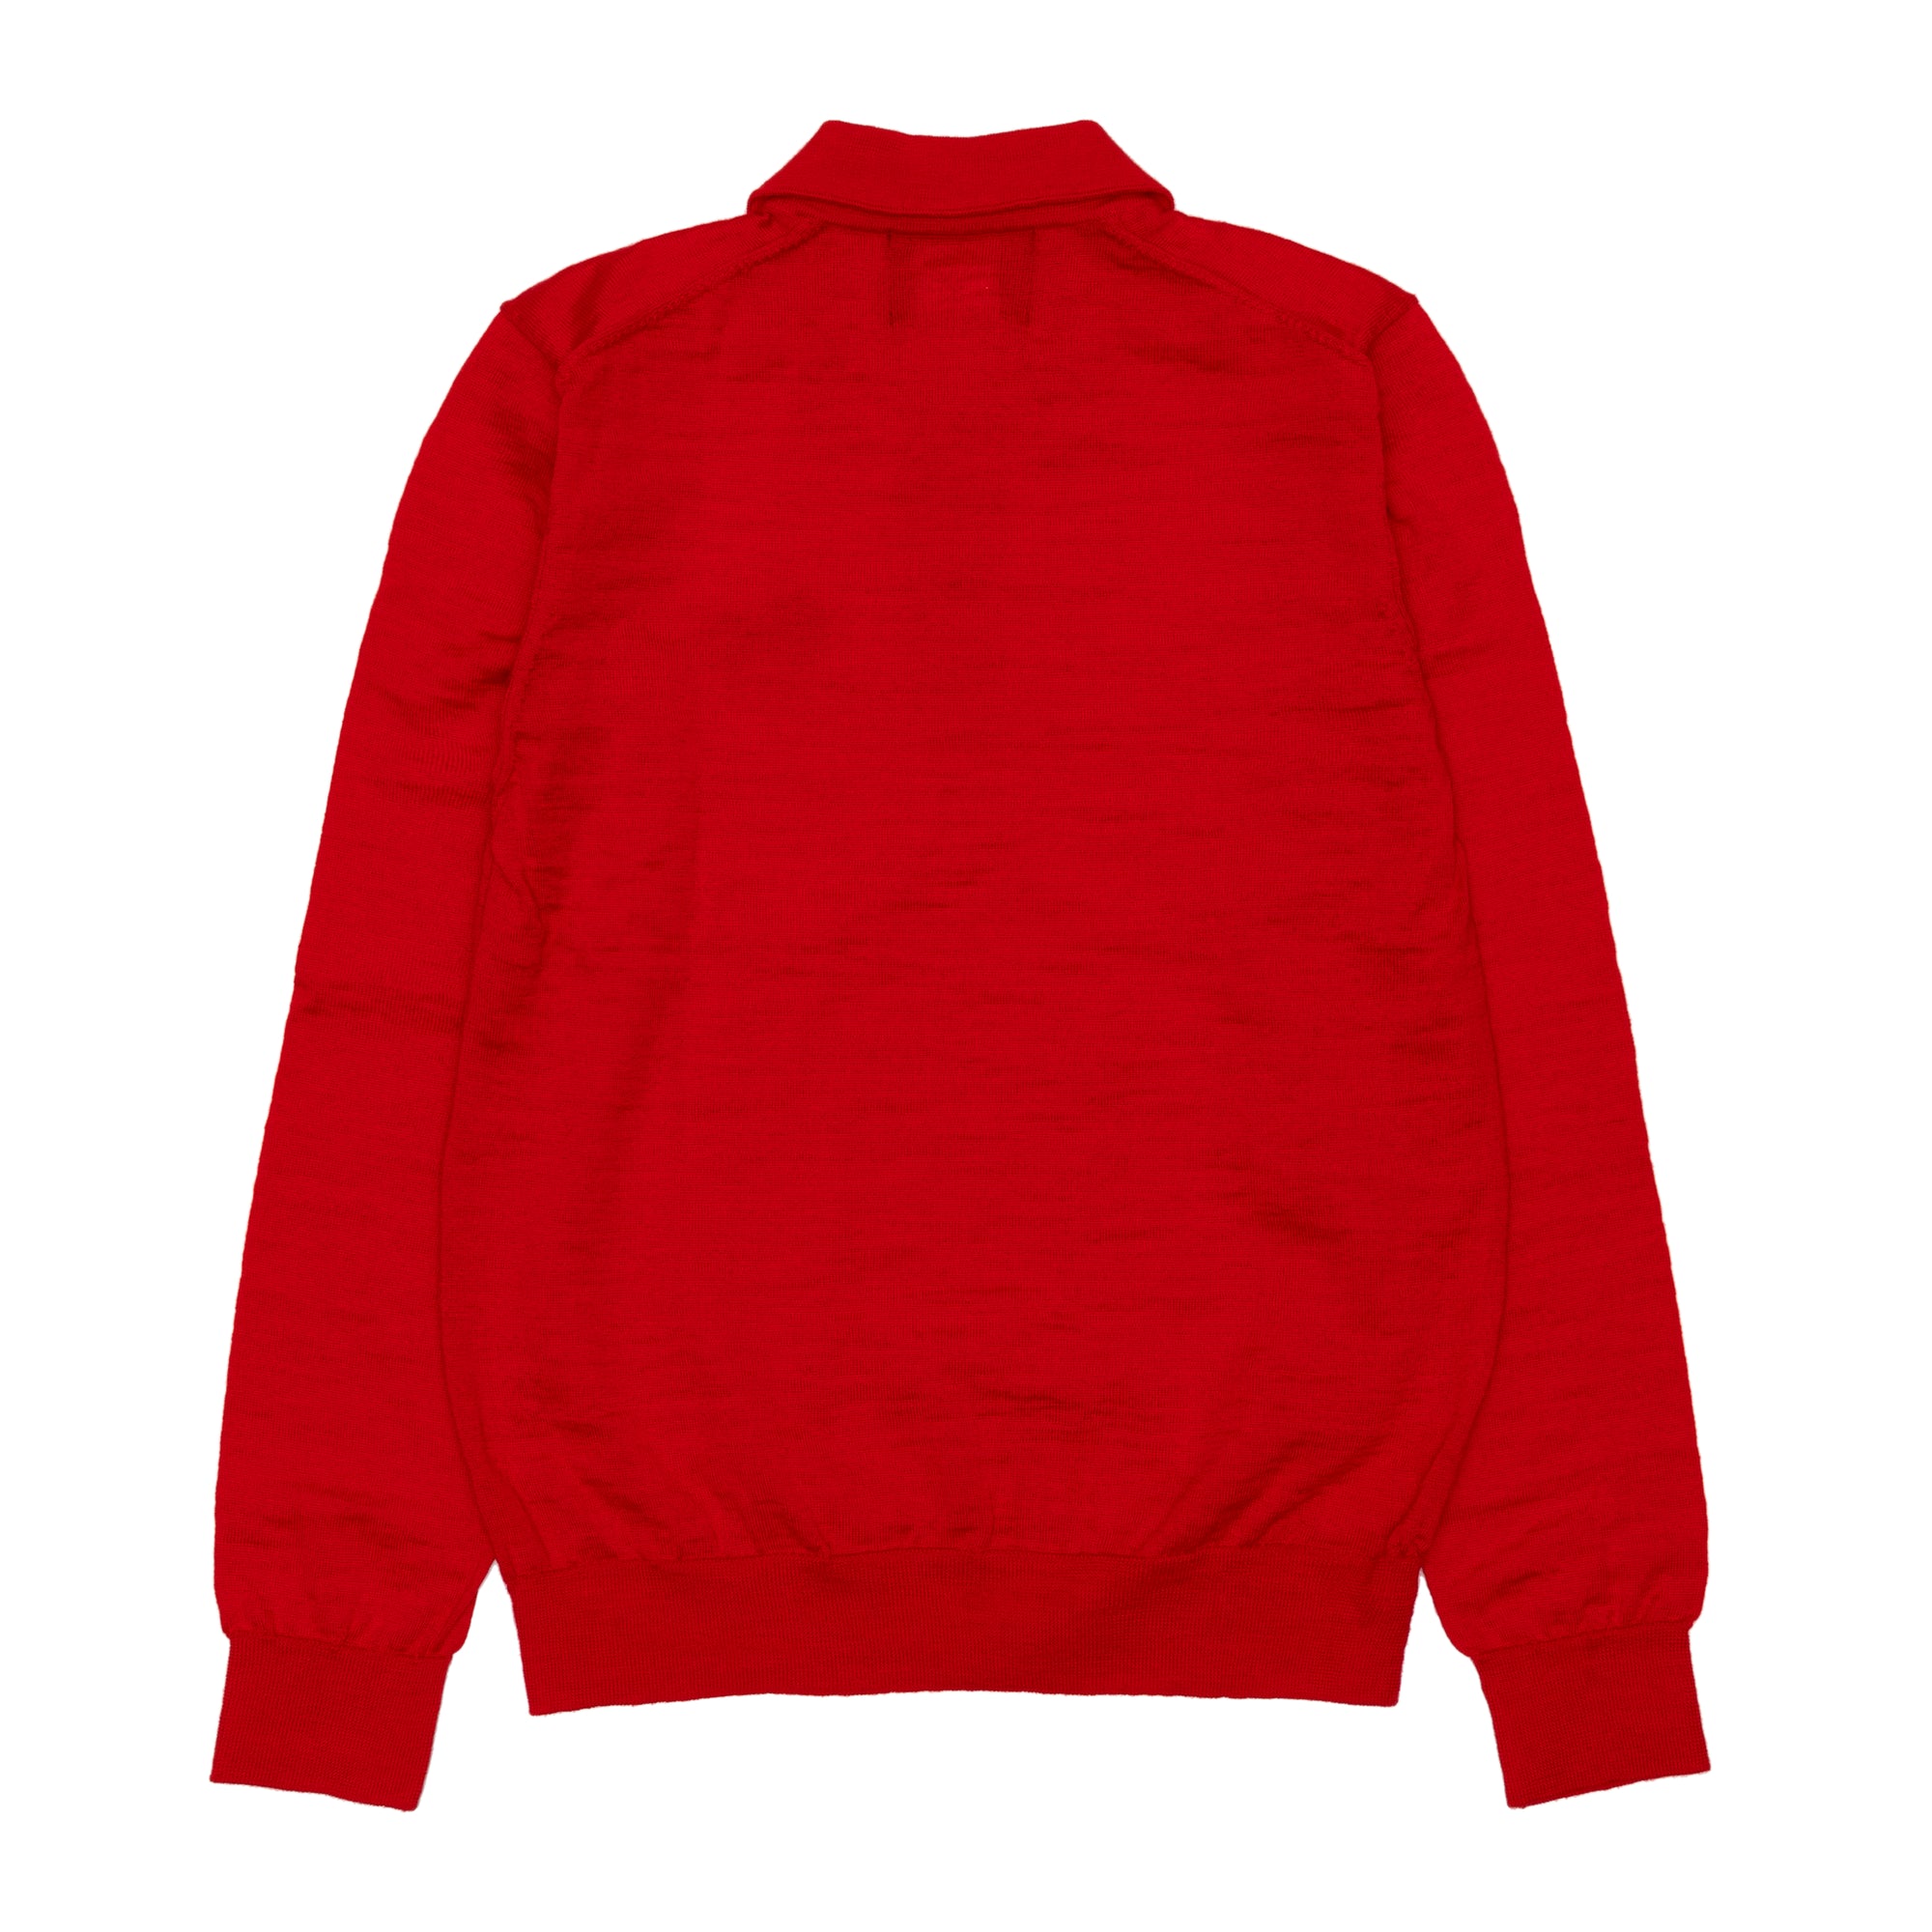 THE BEATLES CDG - One Point Knit Polo - (Red) view 2